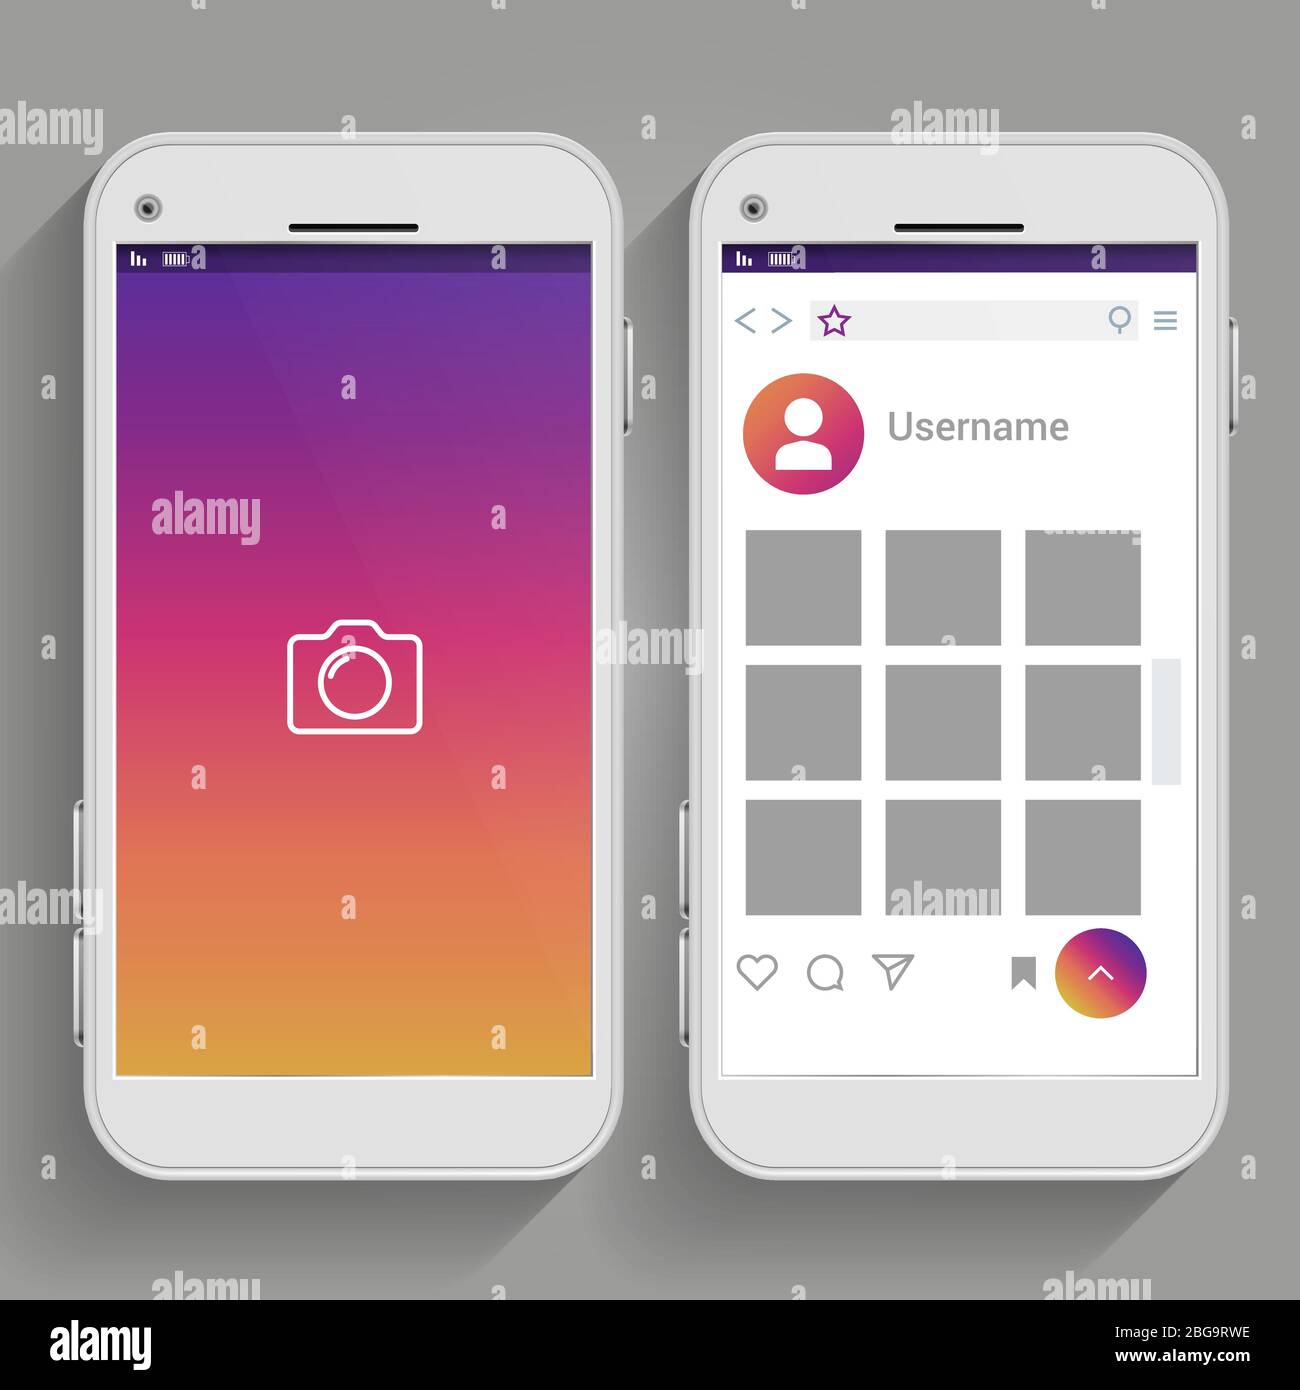 Smartphones inspired and social media page design flat. Vector illustration Stock Vector